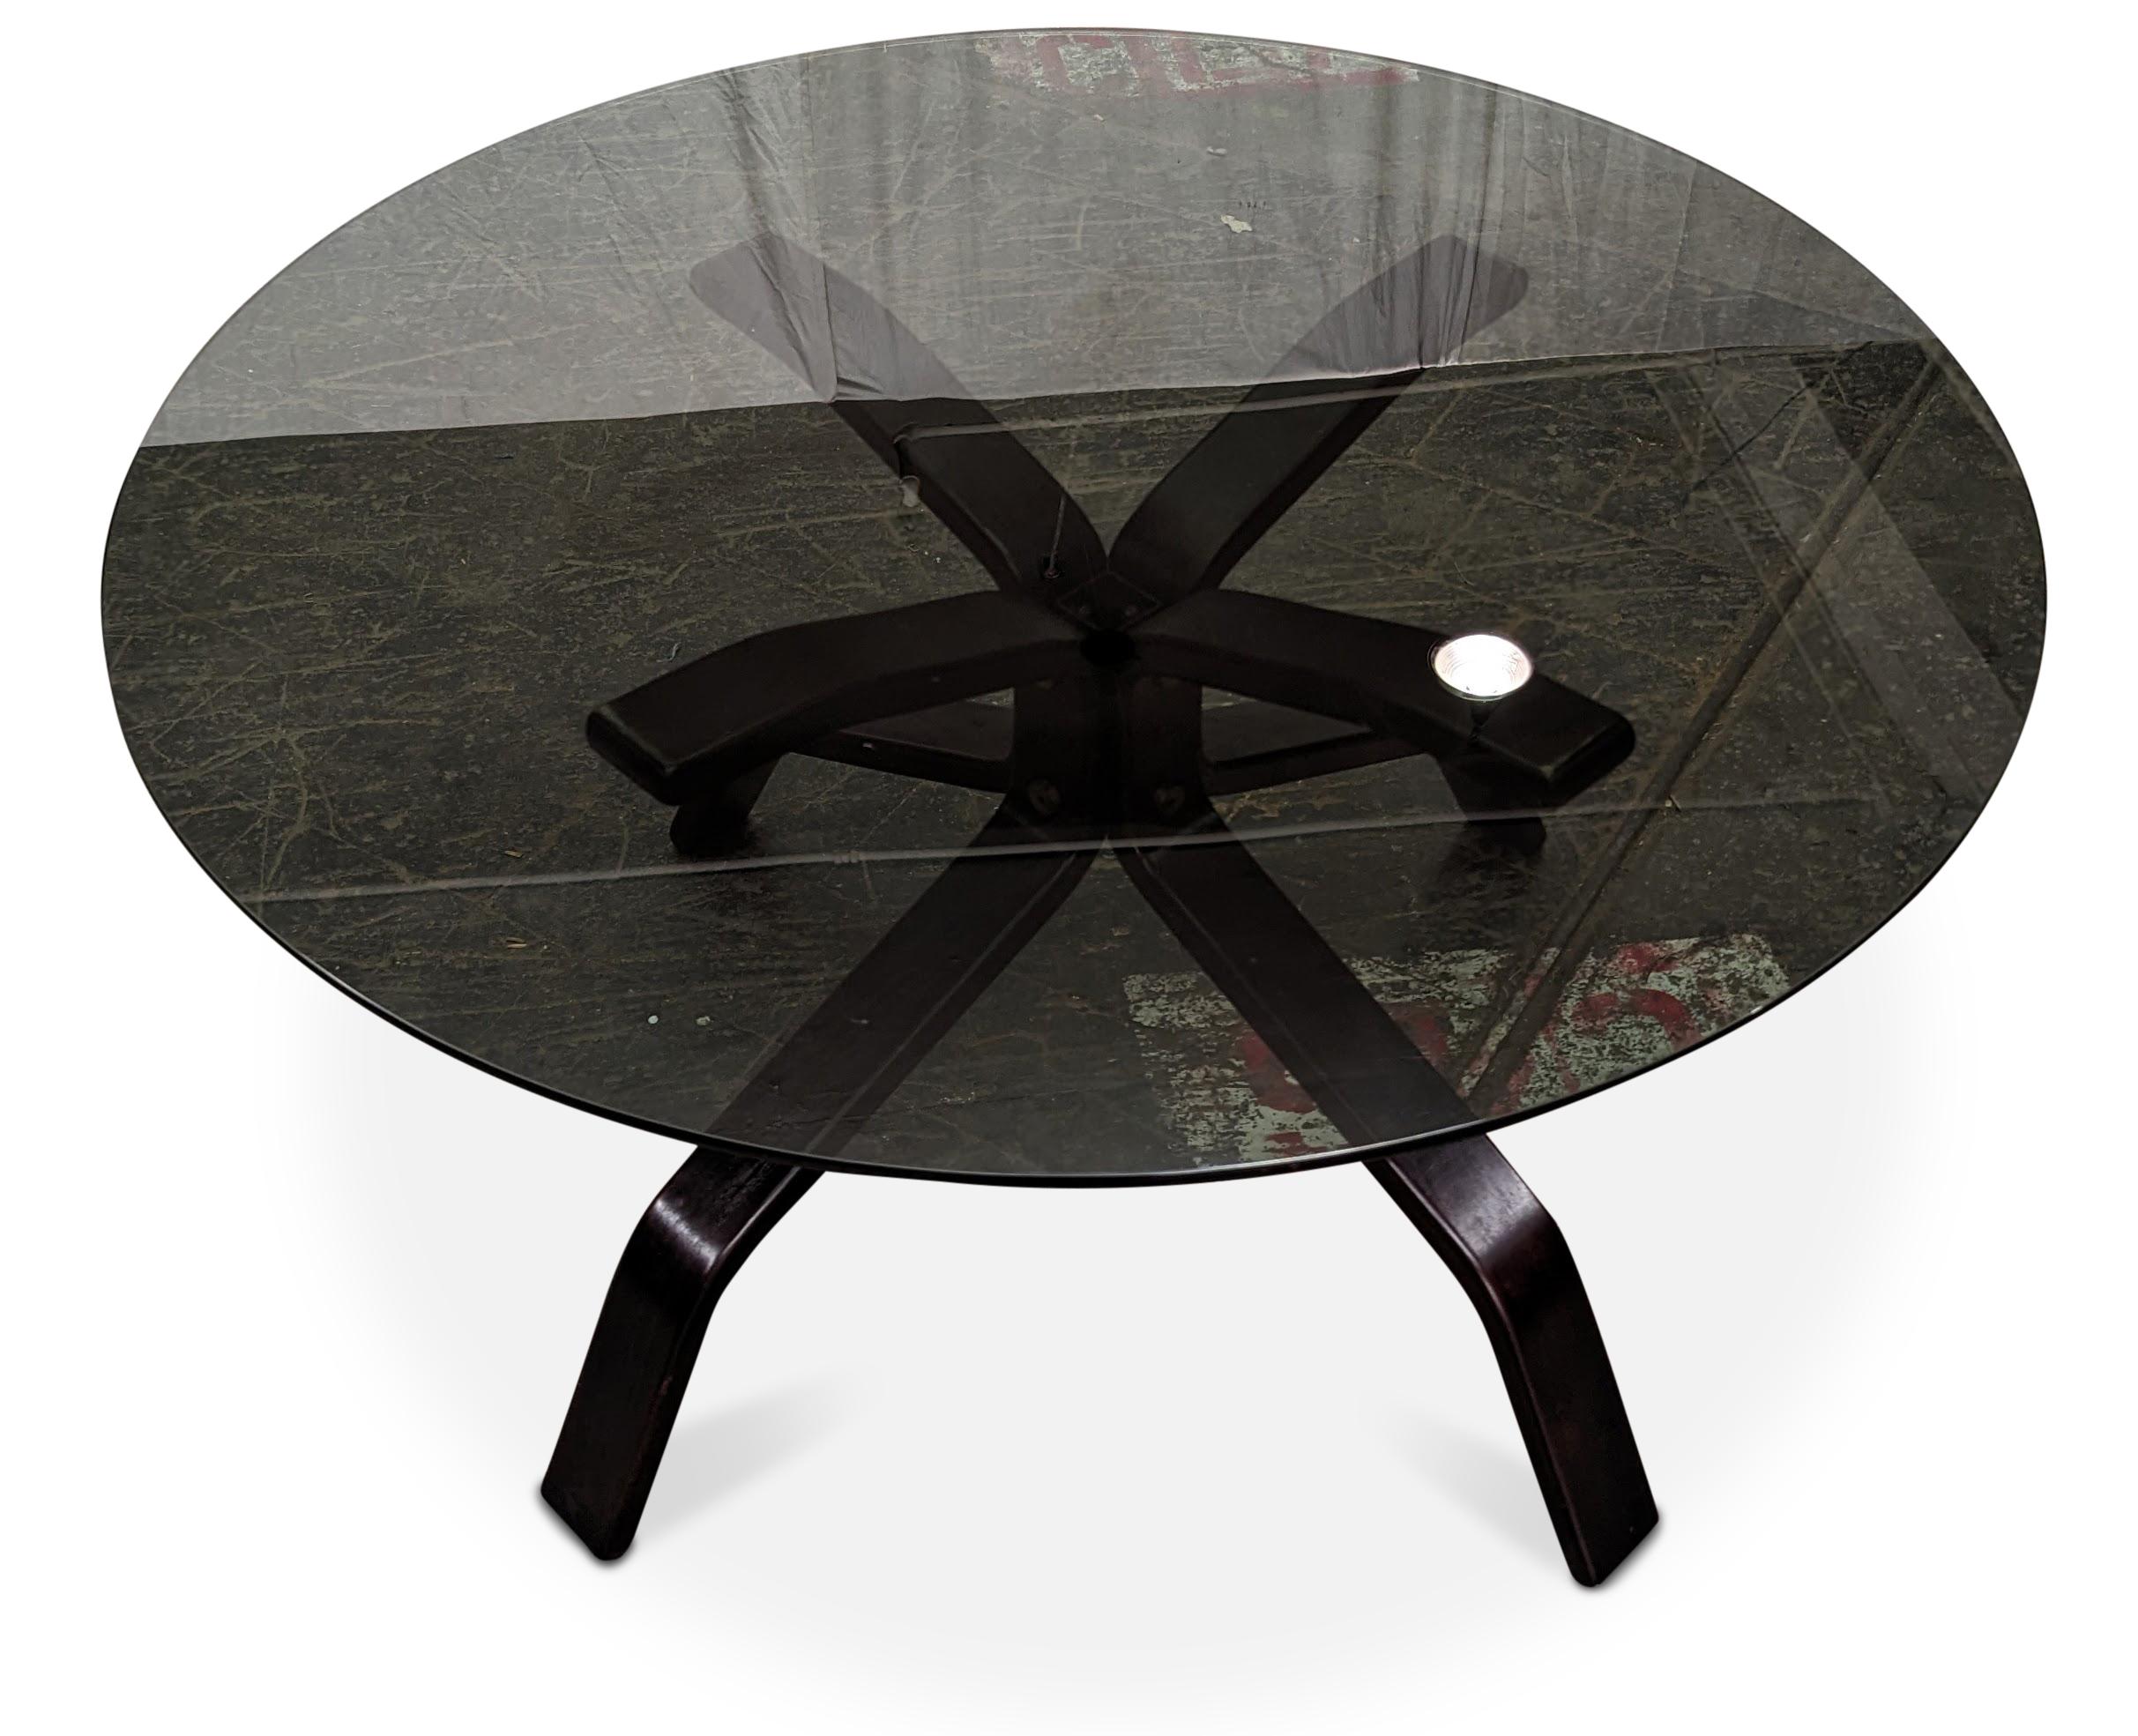 Mid-20th Century Vintage Danish Mid Century Glass Top Coffee Table - 082339 For Sale